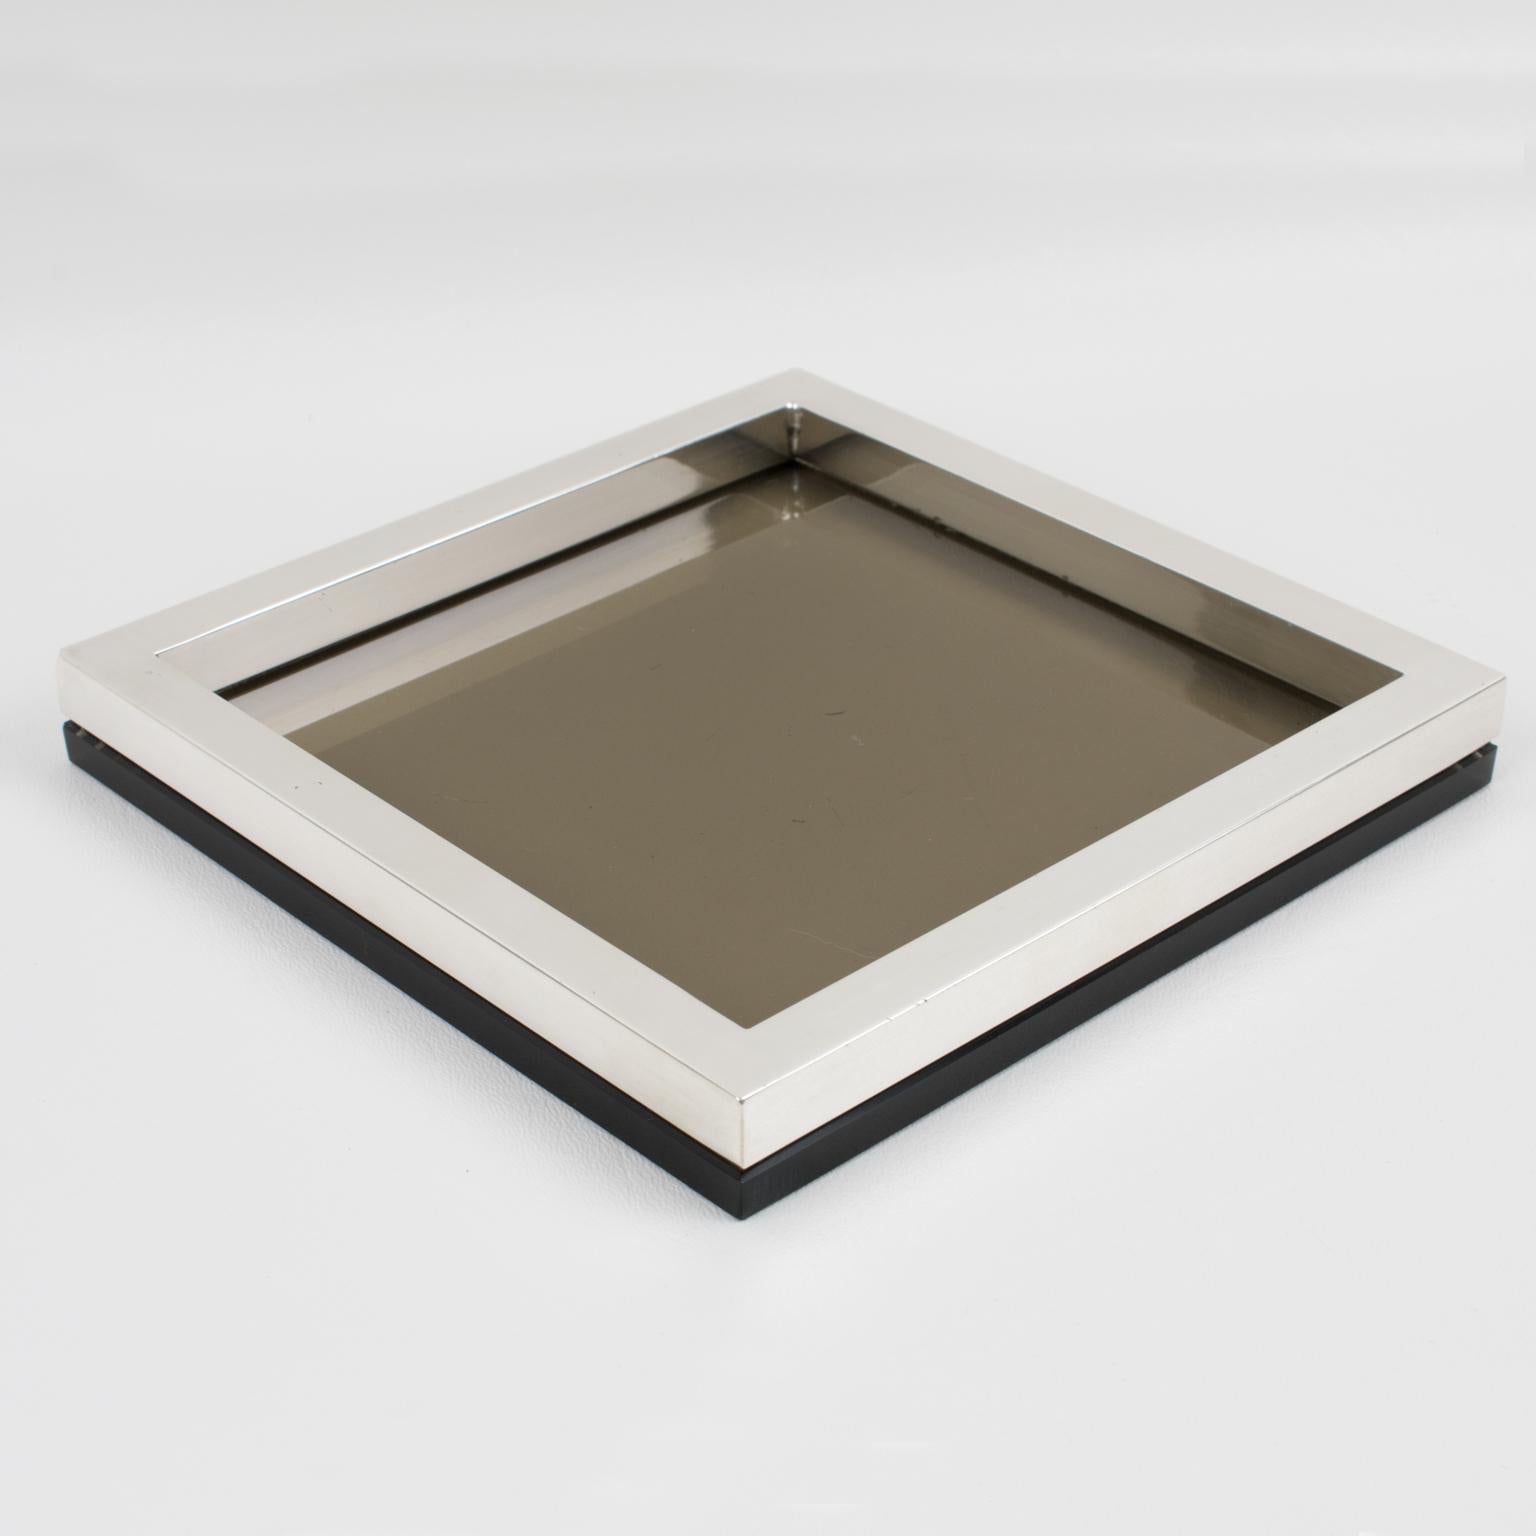 This elegant Mid-Century silver plate and glass tray, catchall or vide poche, was designed by silversmith R. Debladis, Paris, in the 1970s. The centerpiece boasts a square shape with a streamlined design featuring a silver-plated metal gallery and a